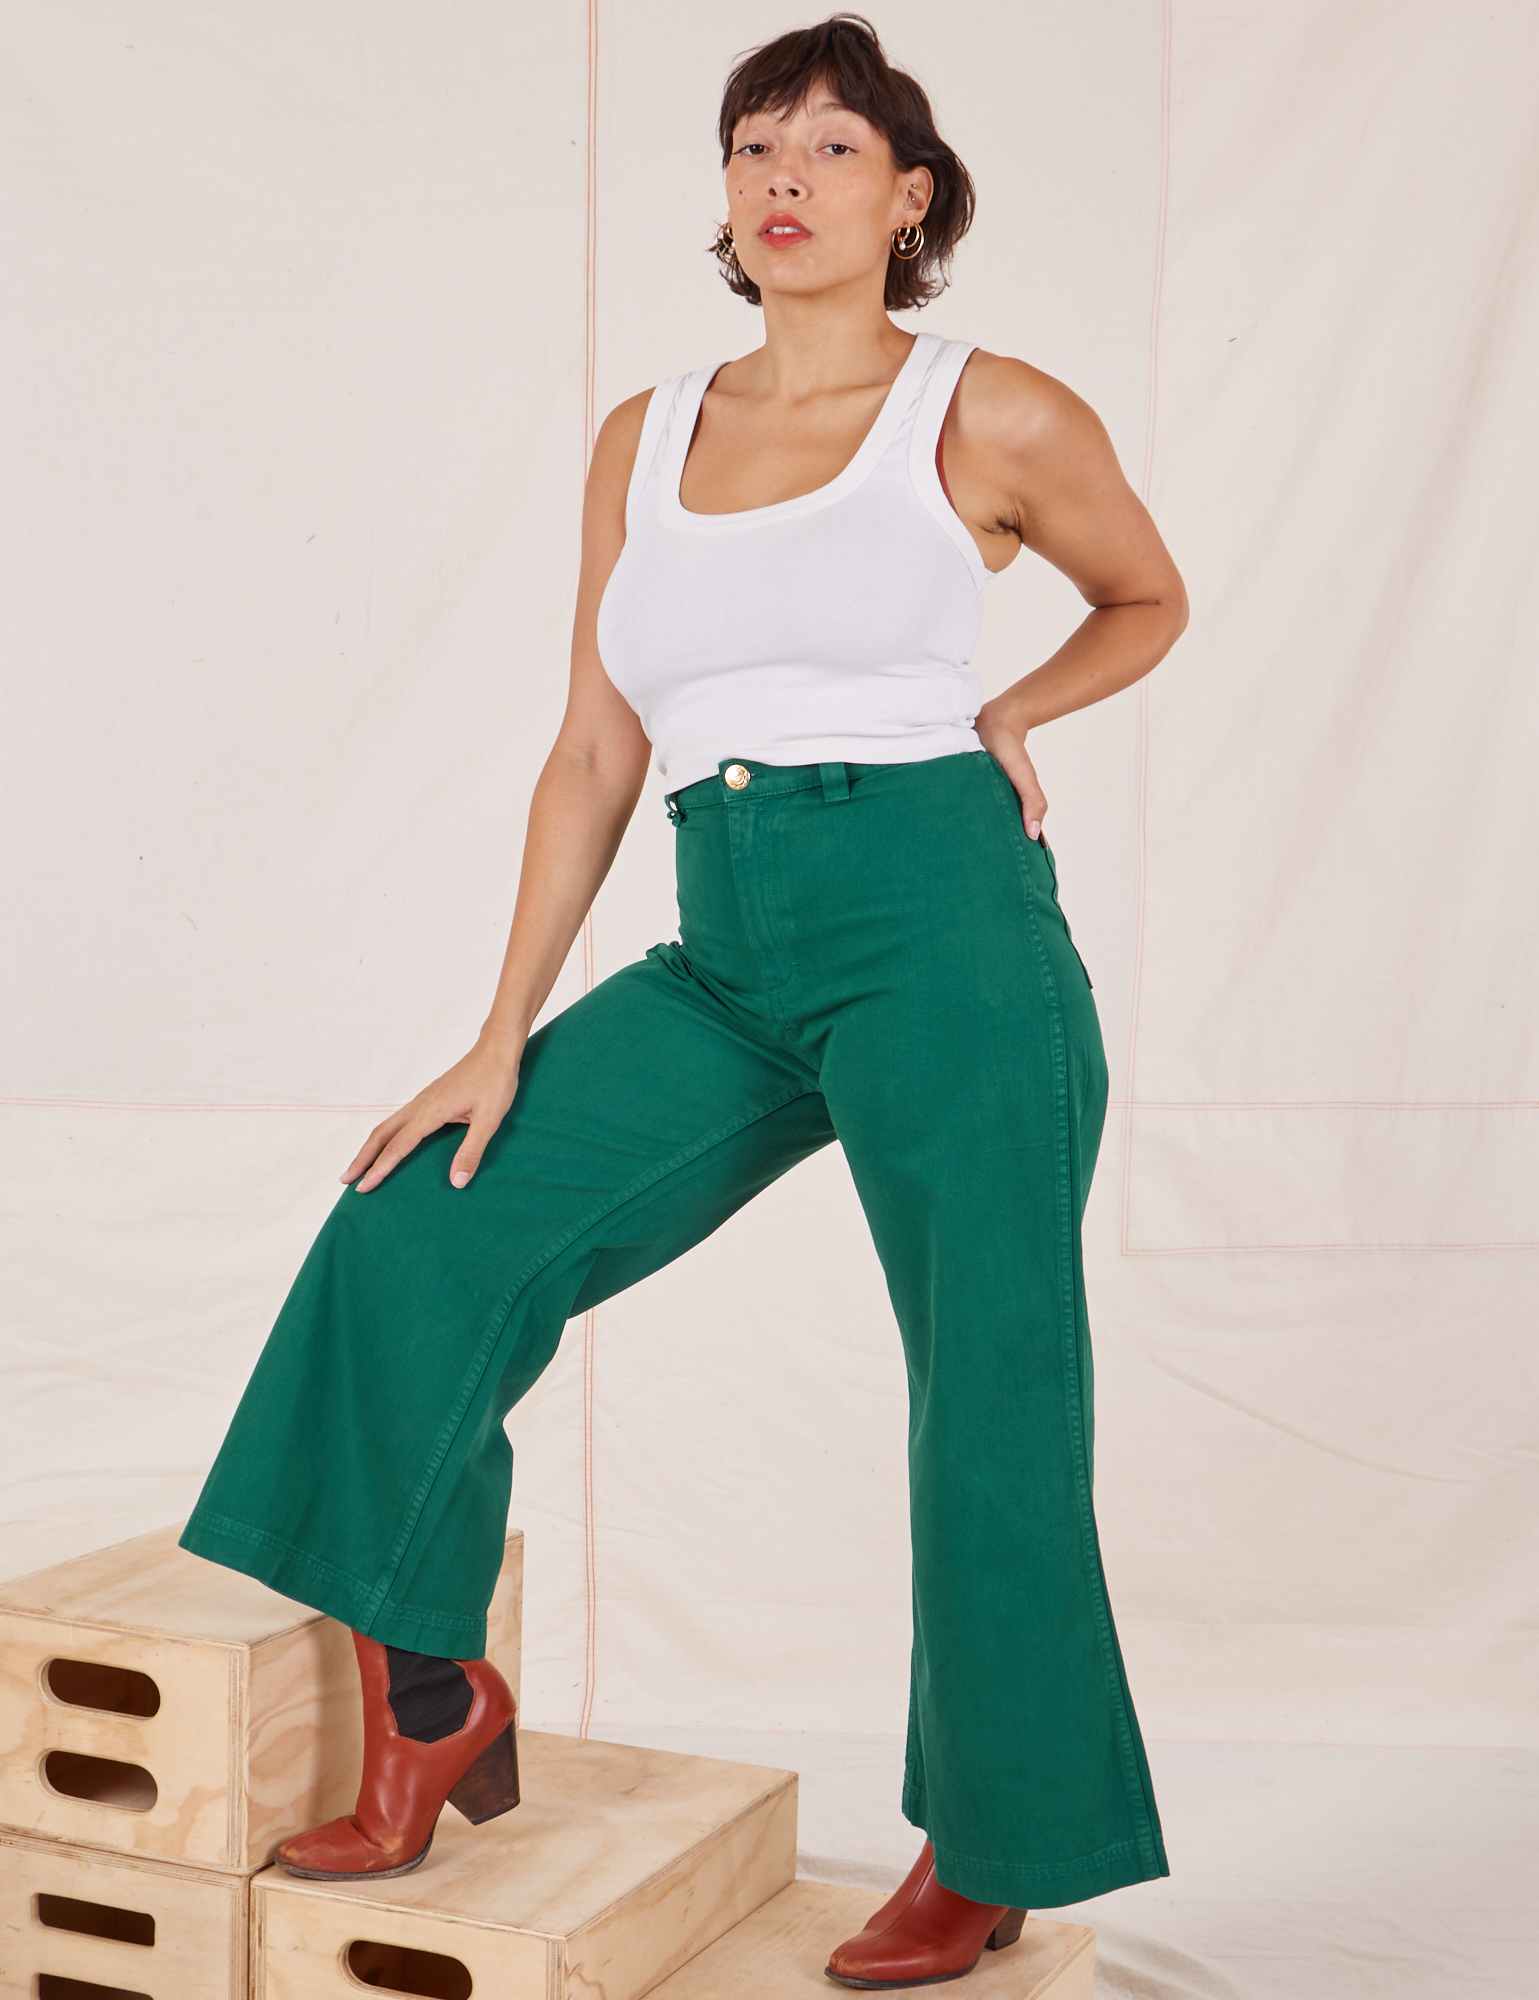 Tiara is wearing Bell Bottoms in Hunter Green and vintage off-white Cropped Tank Top